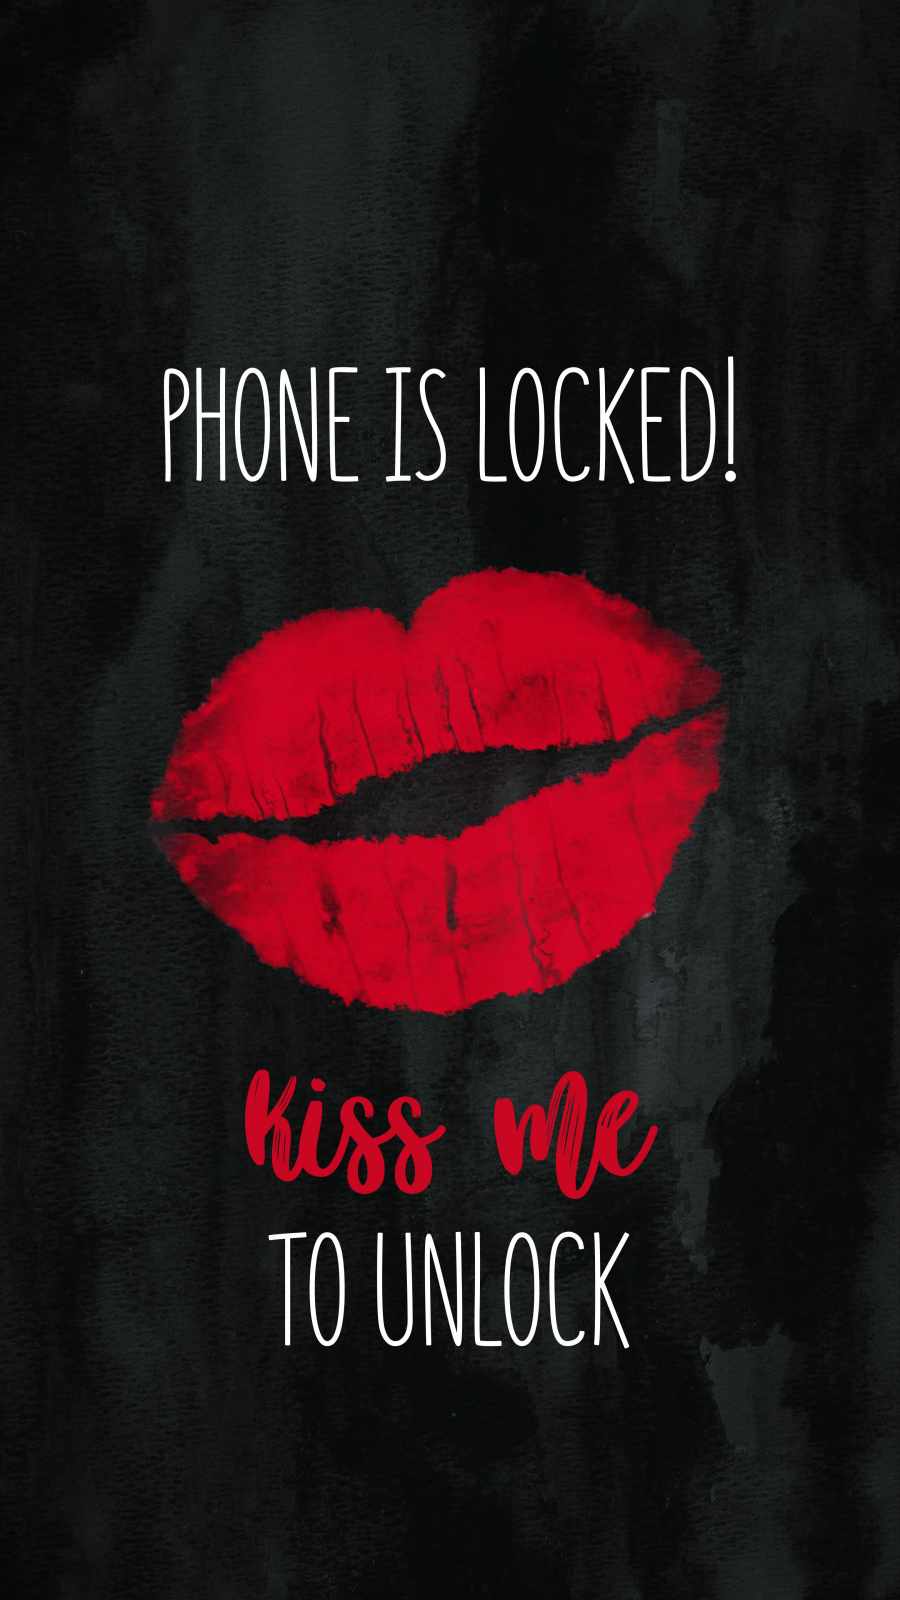 Kiss Me To Unlock IPhone Wallpaper HD  IPhone Wallpapers